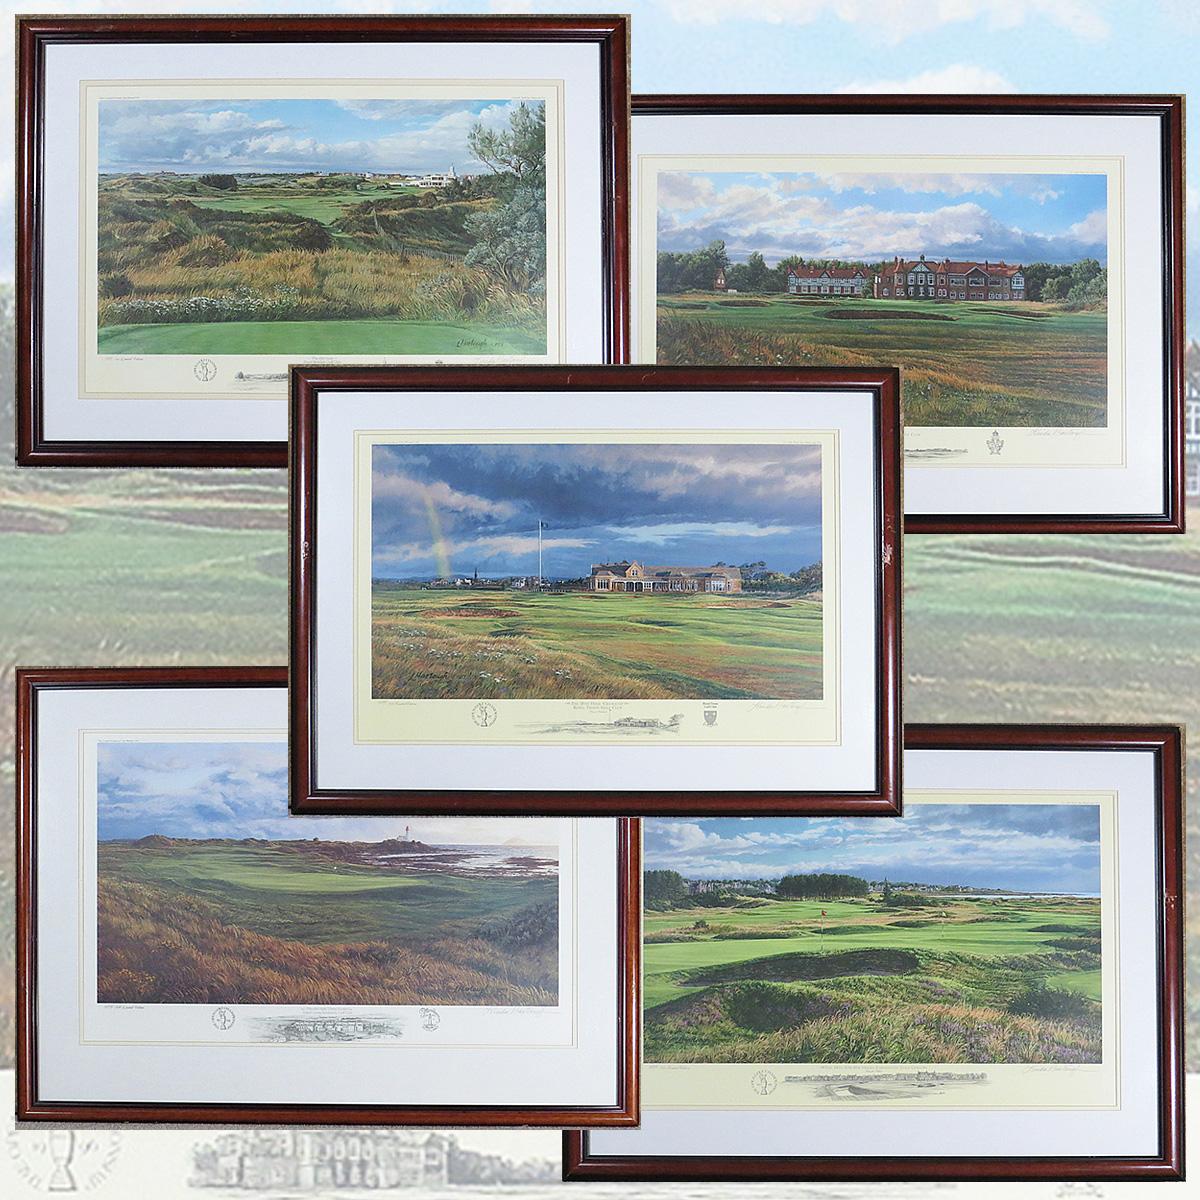 Open Championship Official Artist Series 5 Framed Limited Edition Signed Prints from Original Oil Paintings by Linda Hartough